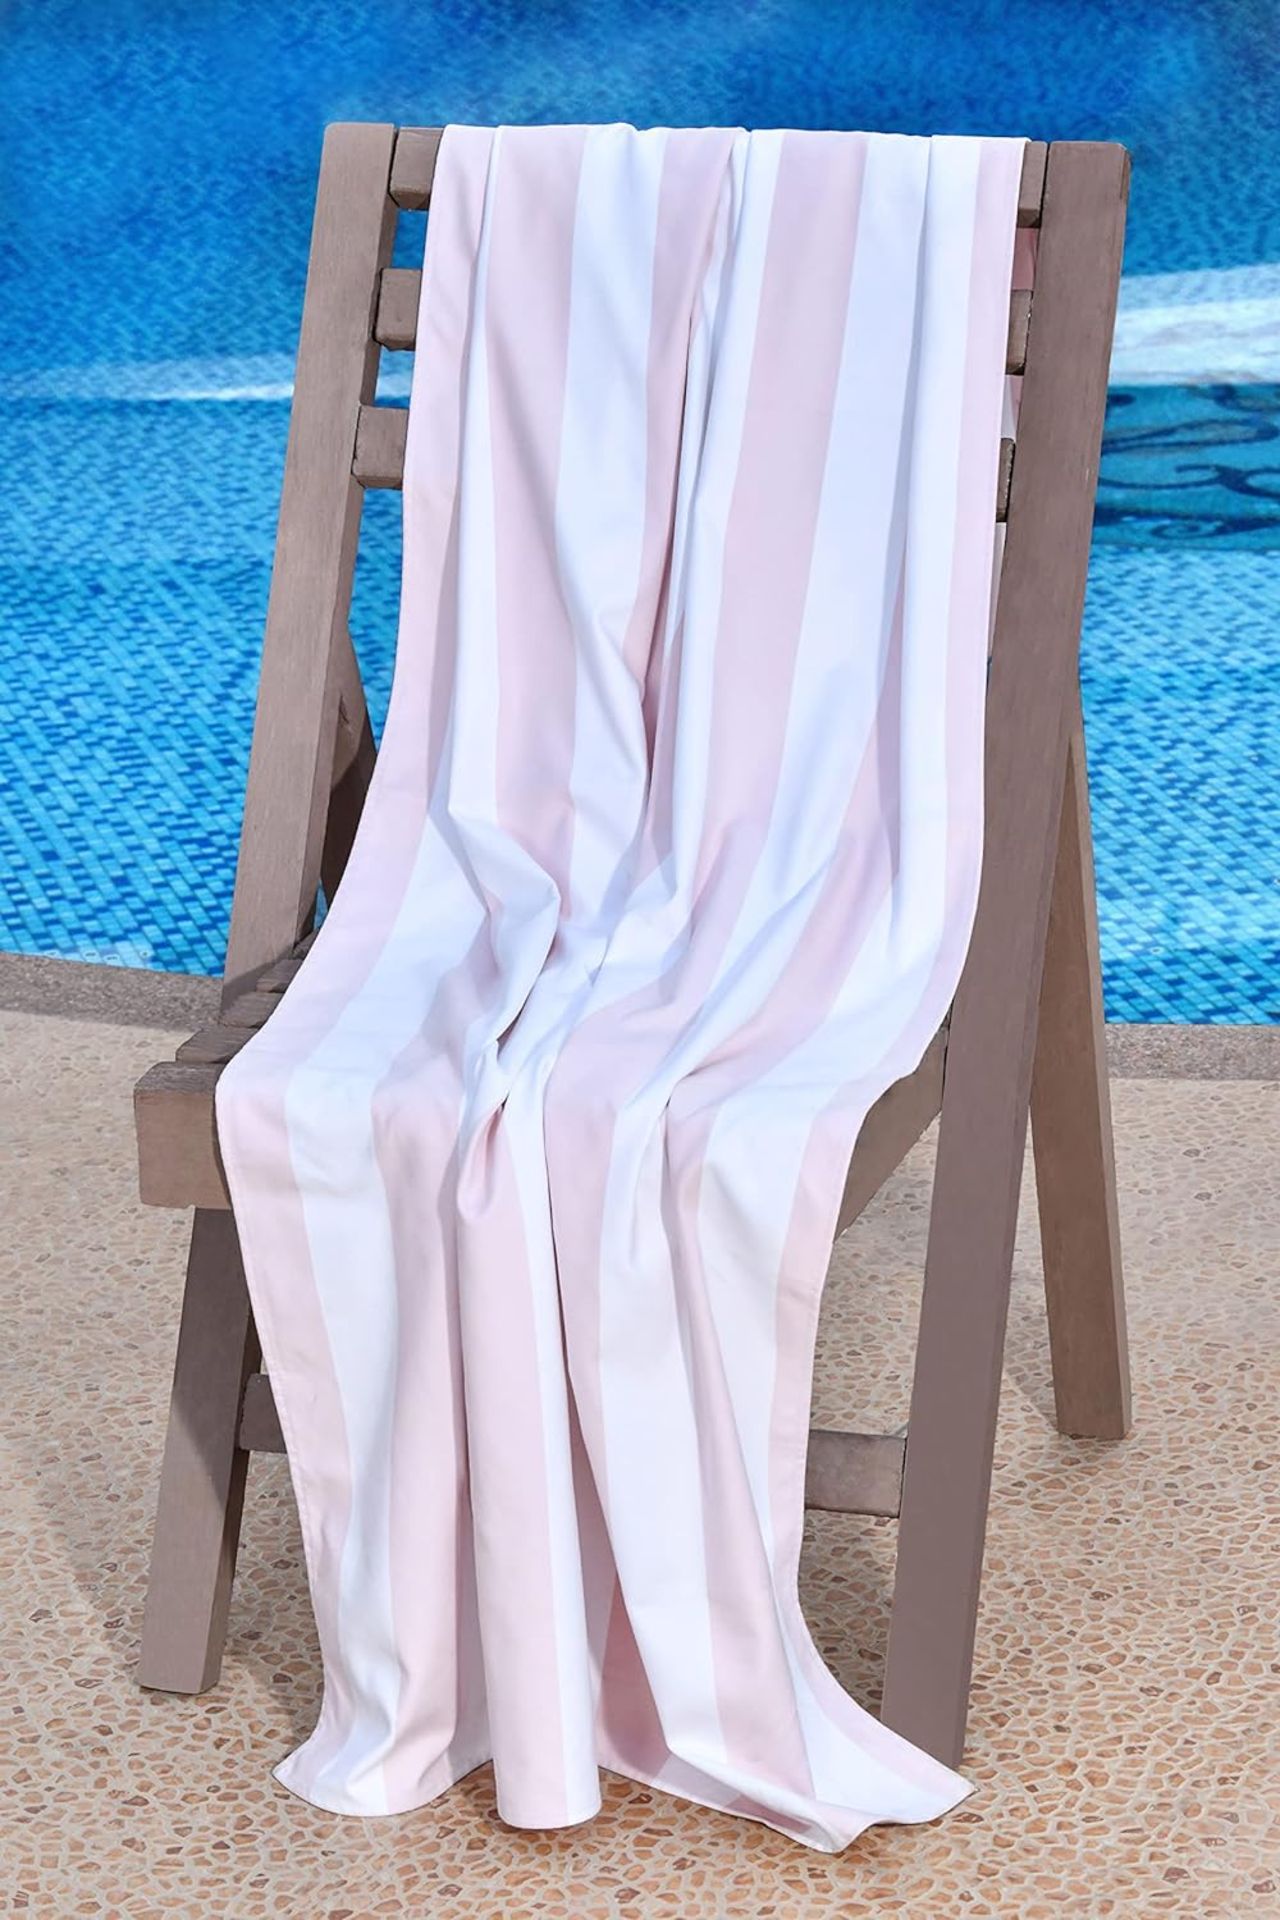 11x NEW & PACKAGED SLEEPDOWN Quick Dry Beach Towel 90 x 160cm With Carry Pouch - BLUSH. RRP £21.99